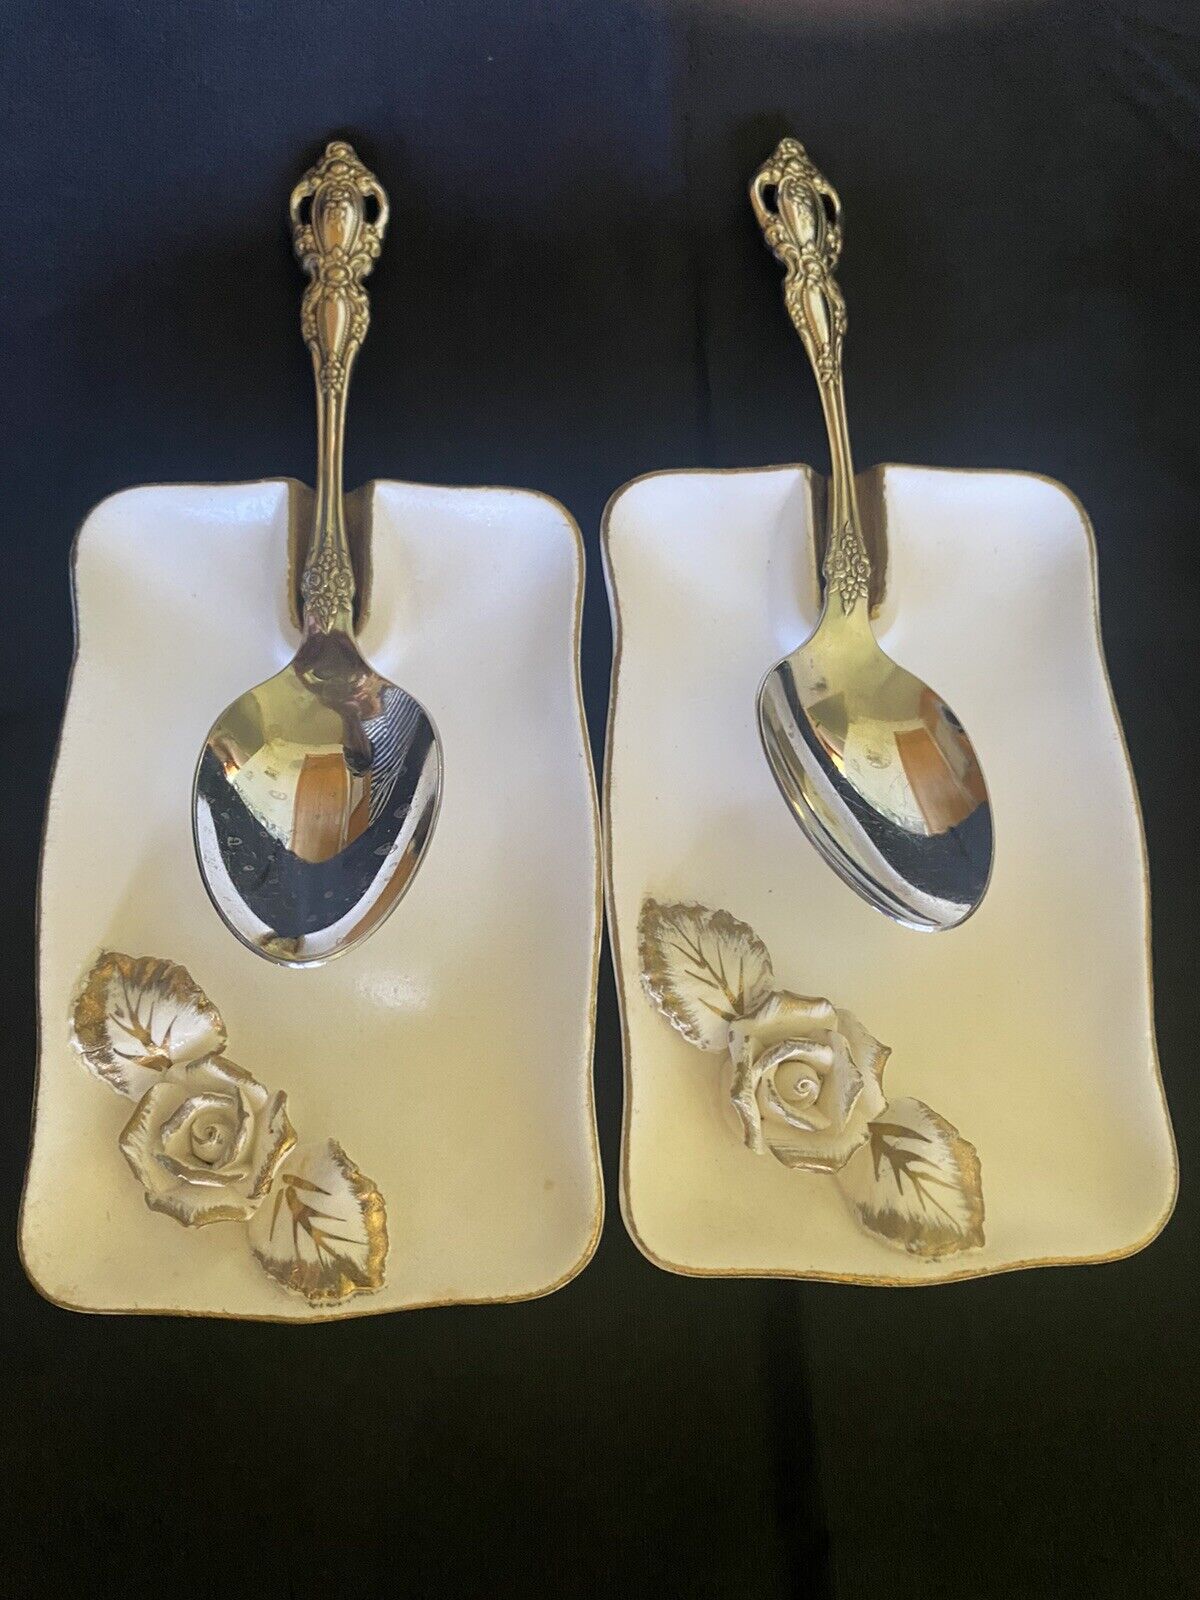 Pair Of Antique Bareuther Spoon Rests Trinket Trays # 781 On Bottom Of Each